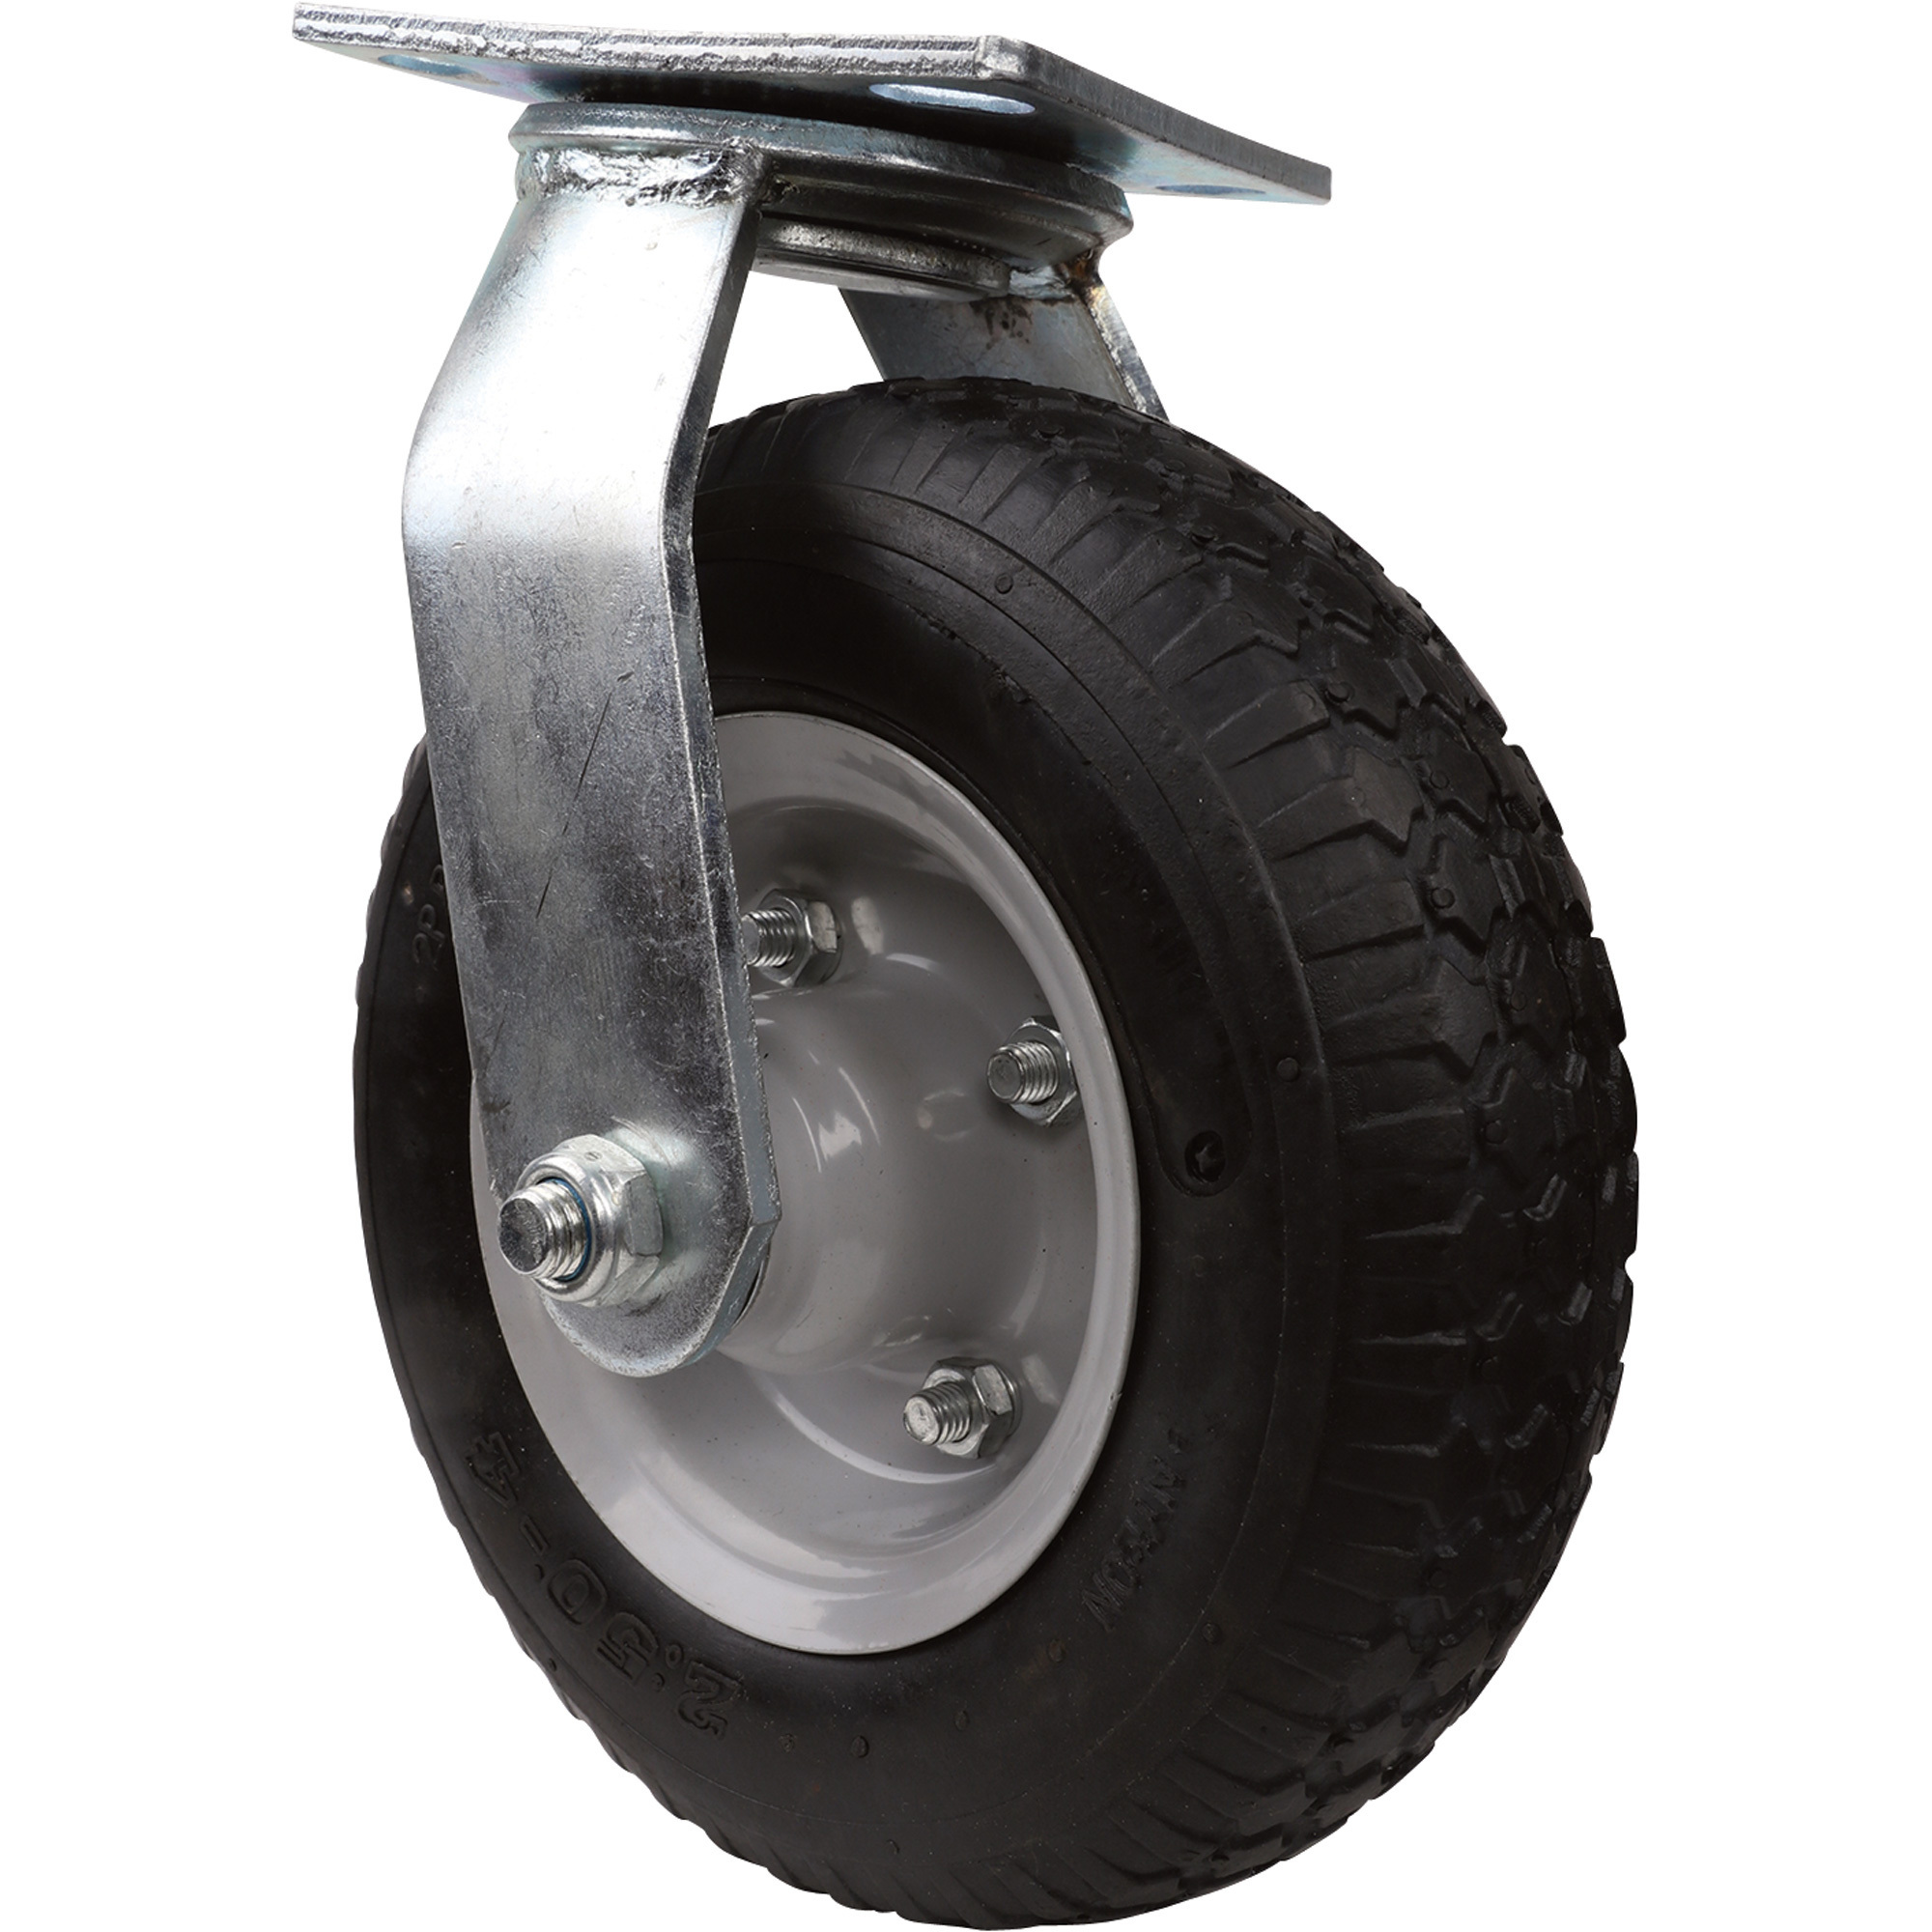 Strongway 8Inch Swivel Flat-Free Rubber Foam-Filled Caster, 250-Lb. Capacity, Knobby Tread